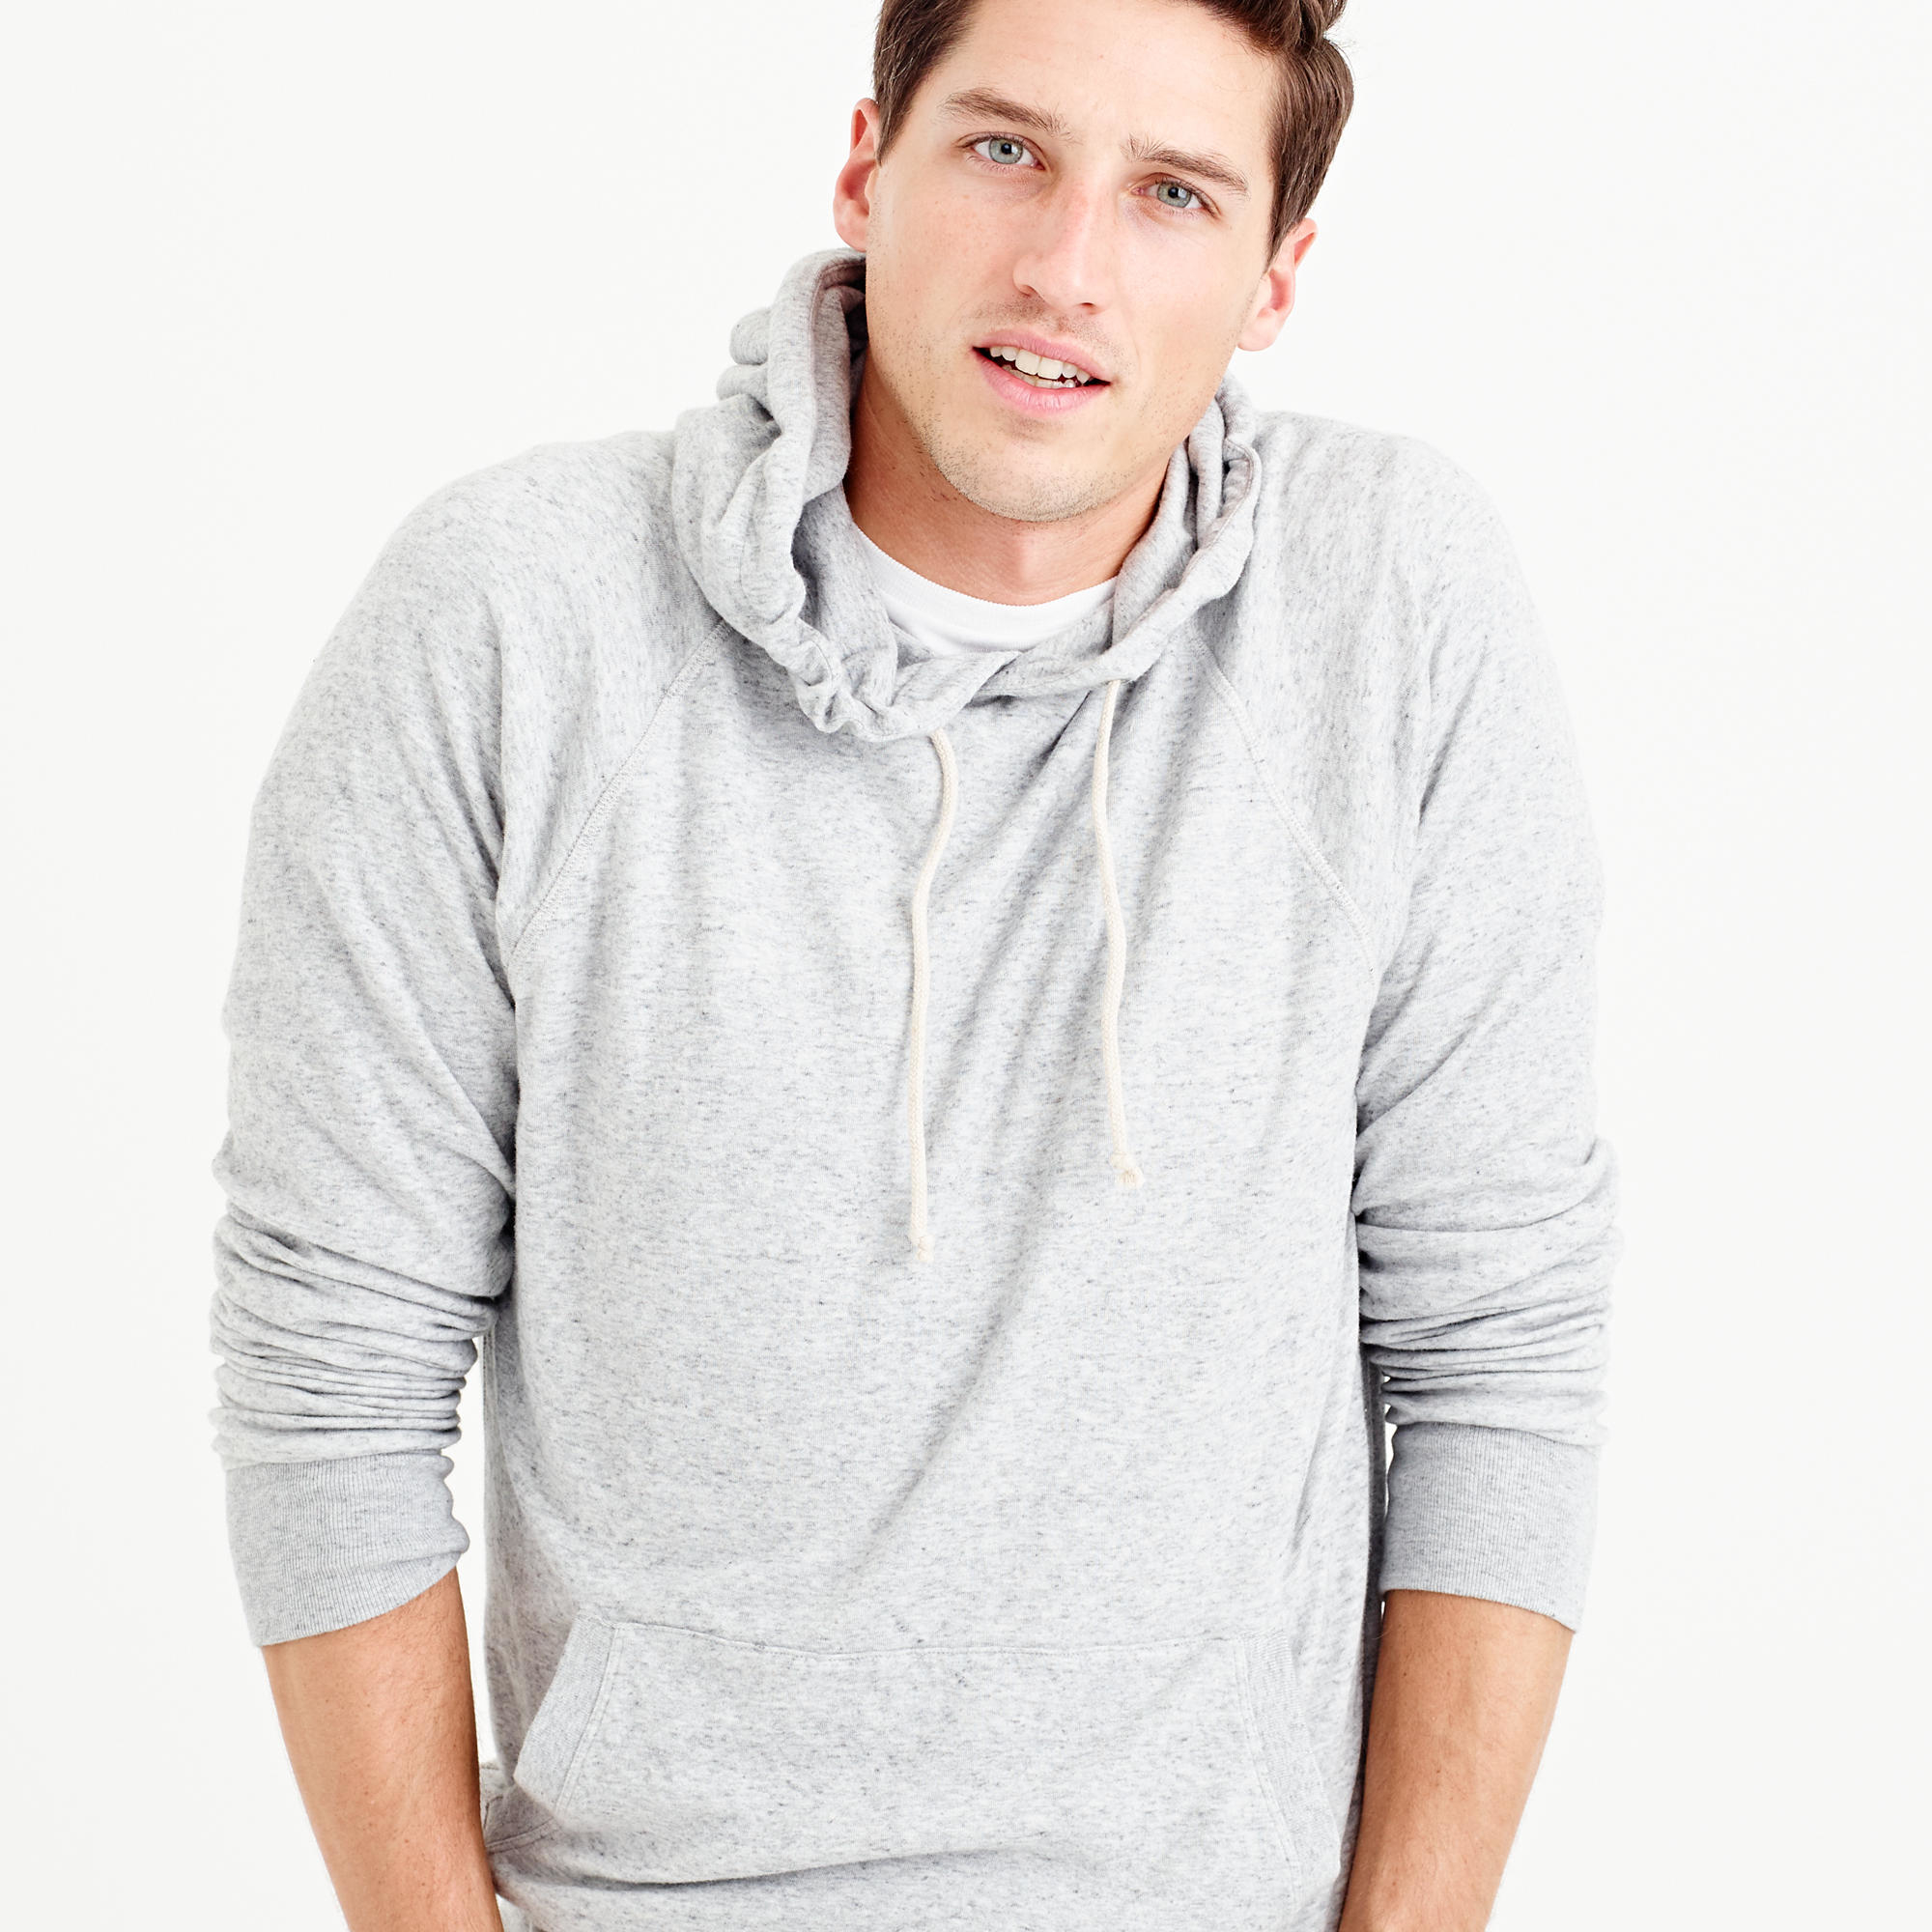 J.Crew Double-knit Pullover Hoodie in Natural for Men - Lyst